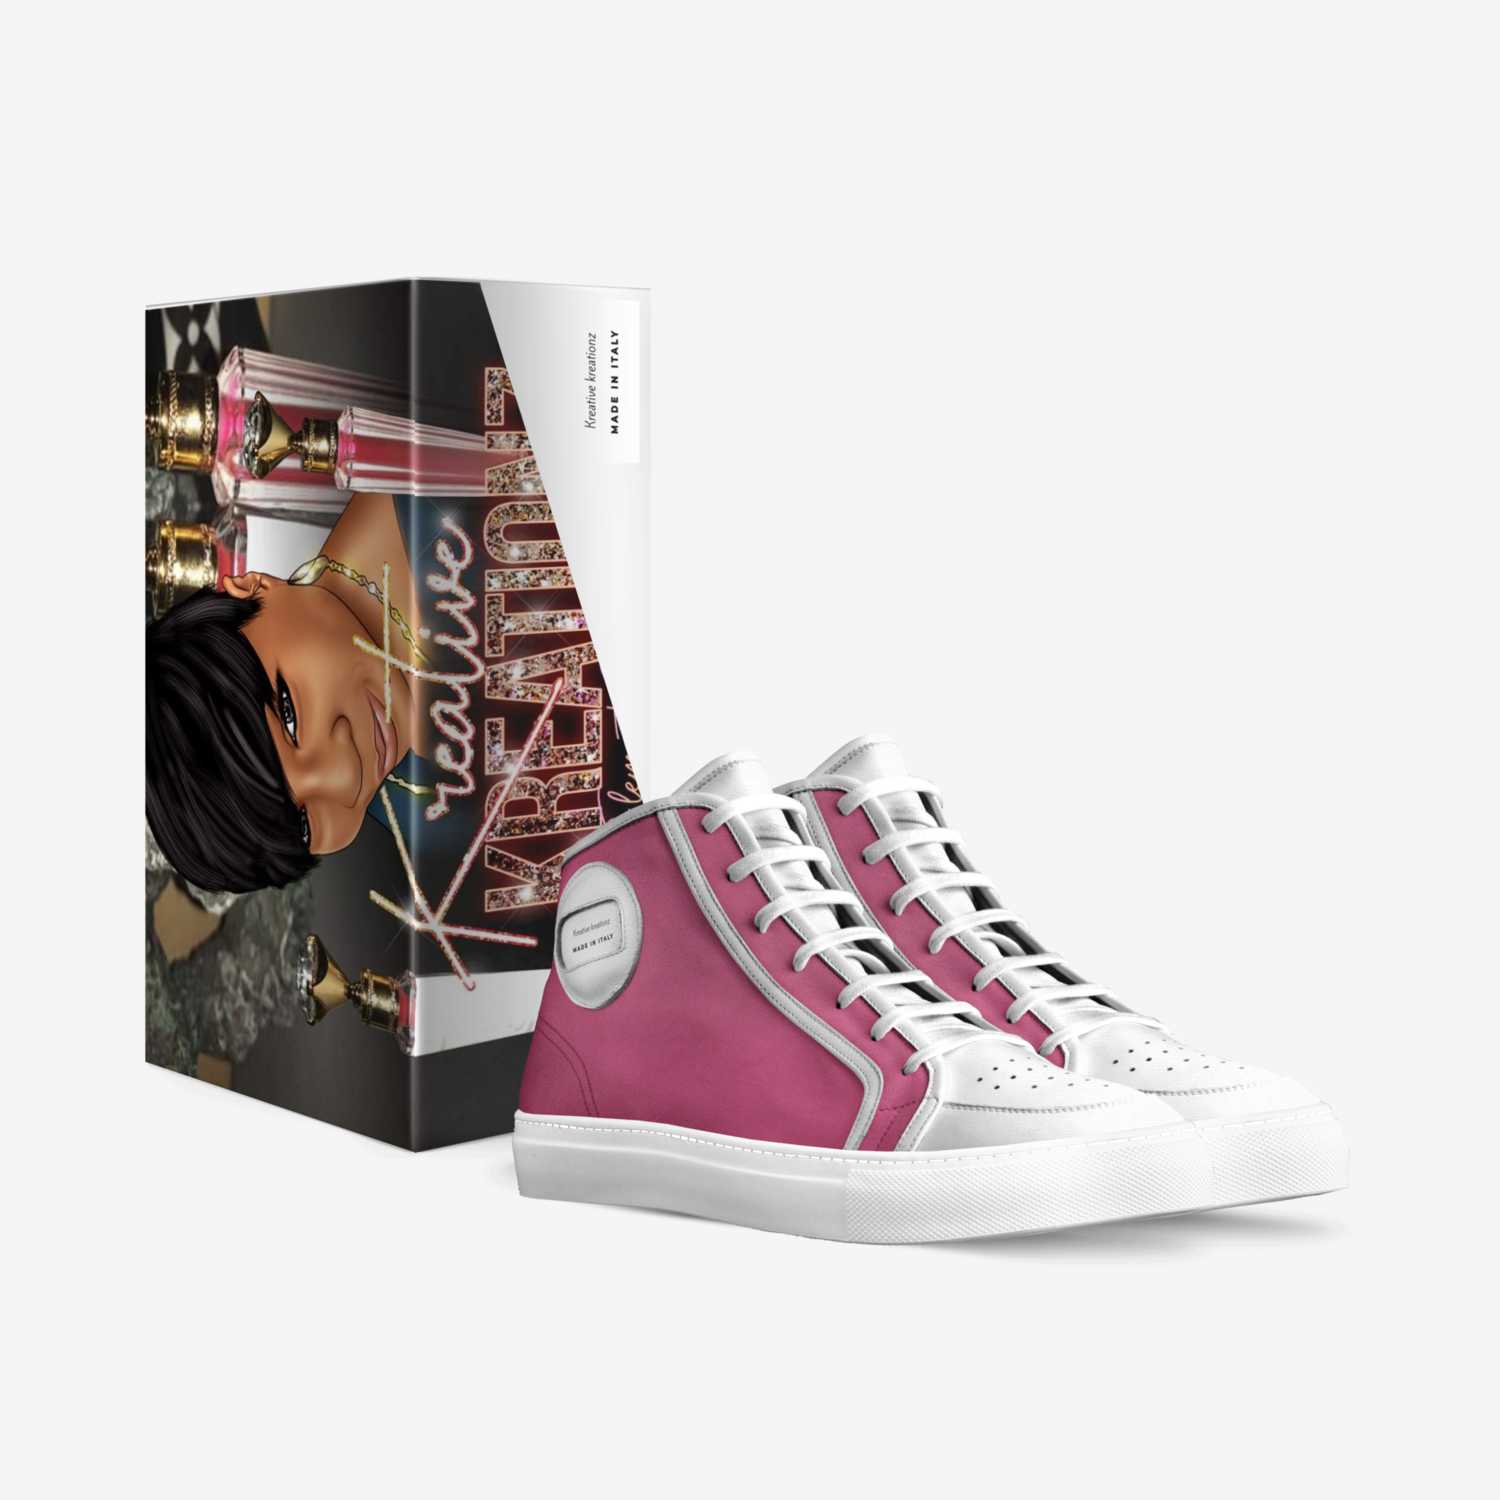 Kreative kreationz custom made in Italy shoes by Tabishia Wright | Box view